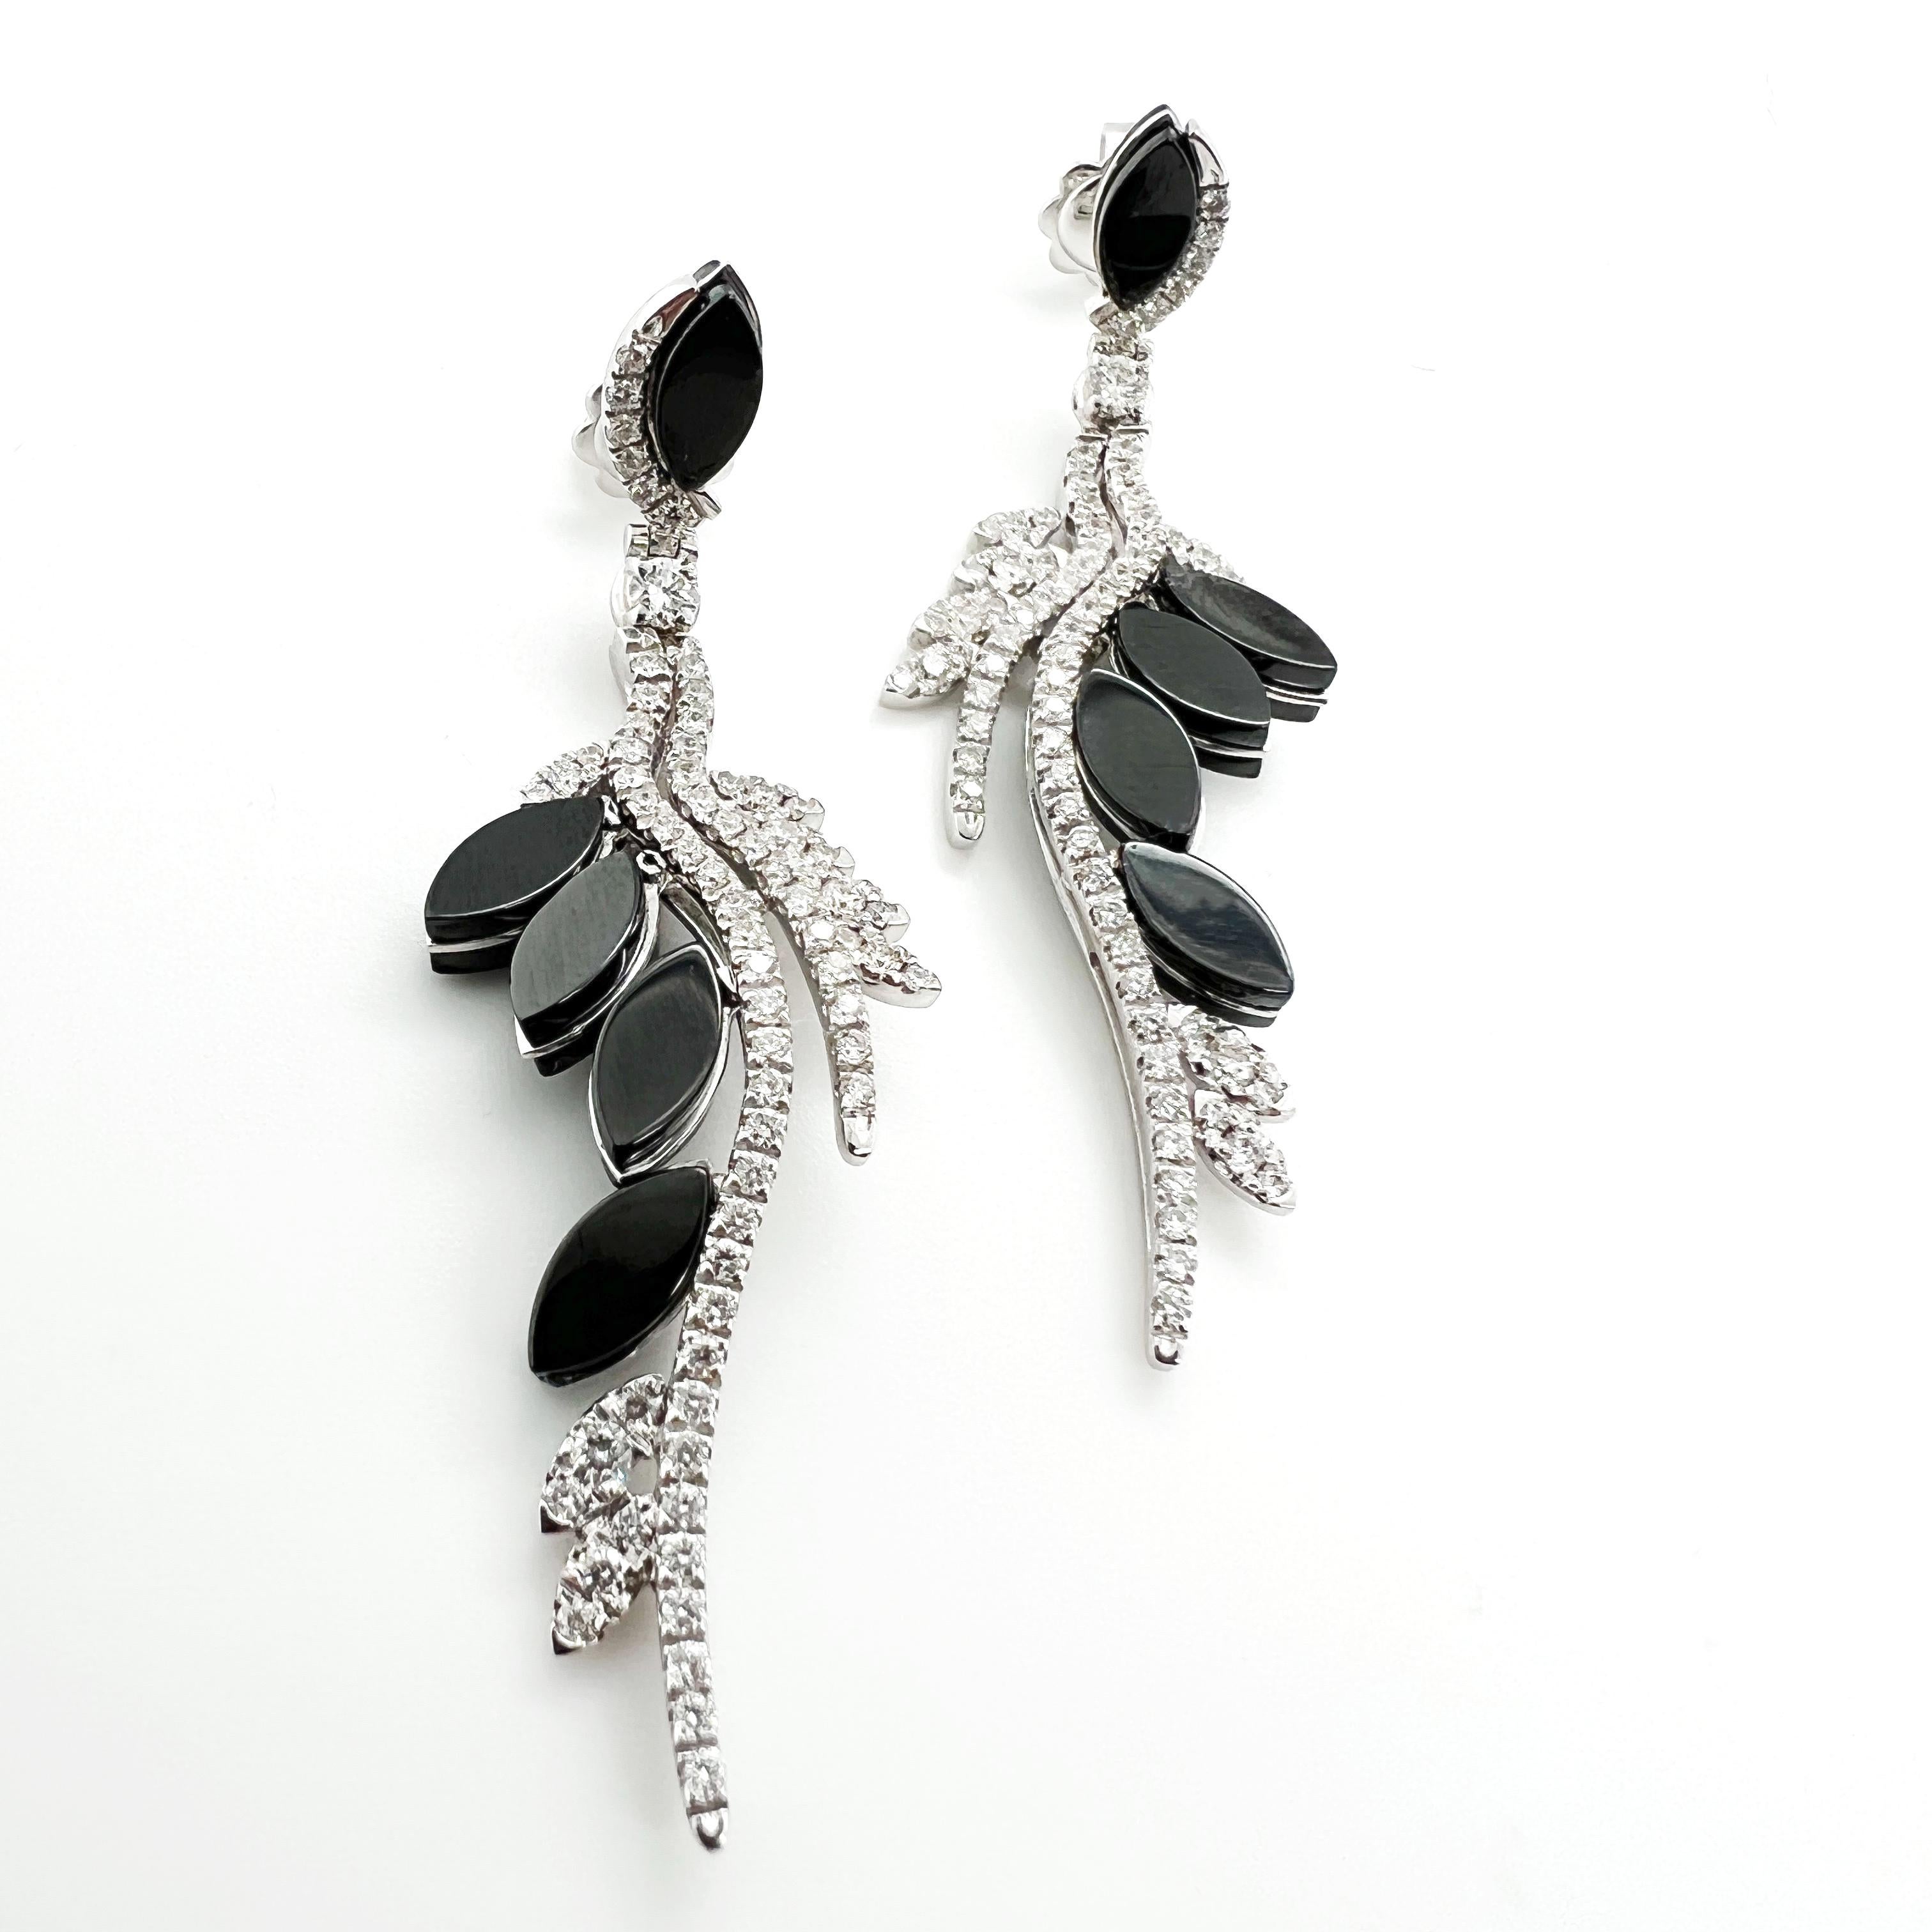 Step into the world of contemporary elegance with our 18kt White Gold Earrings adorned with diamonds and chic black ceramic. Crafted with precision and style, these earrings embody modern sophistication. The luminous 18kt white gold setting exudes